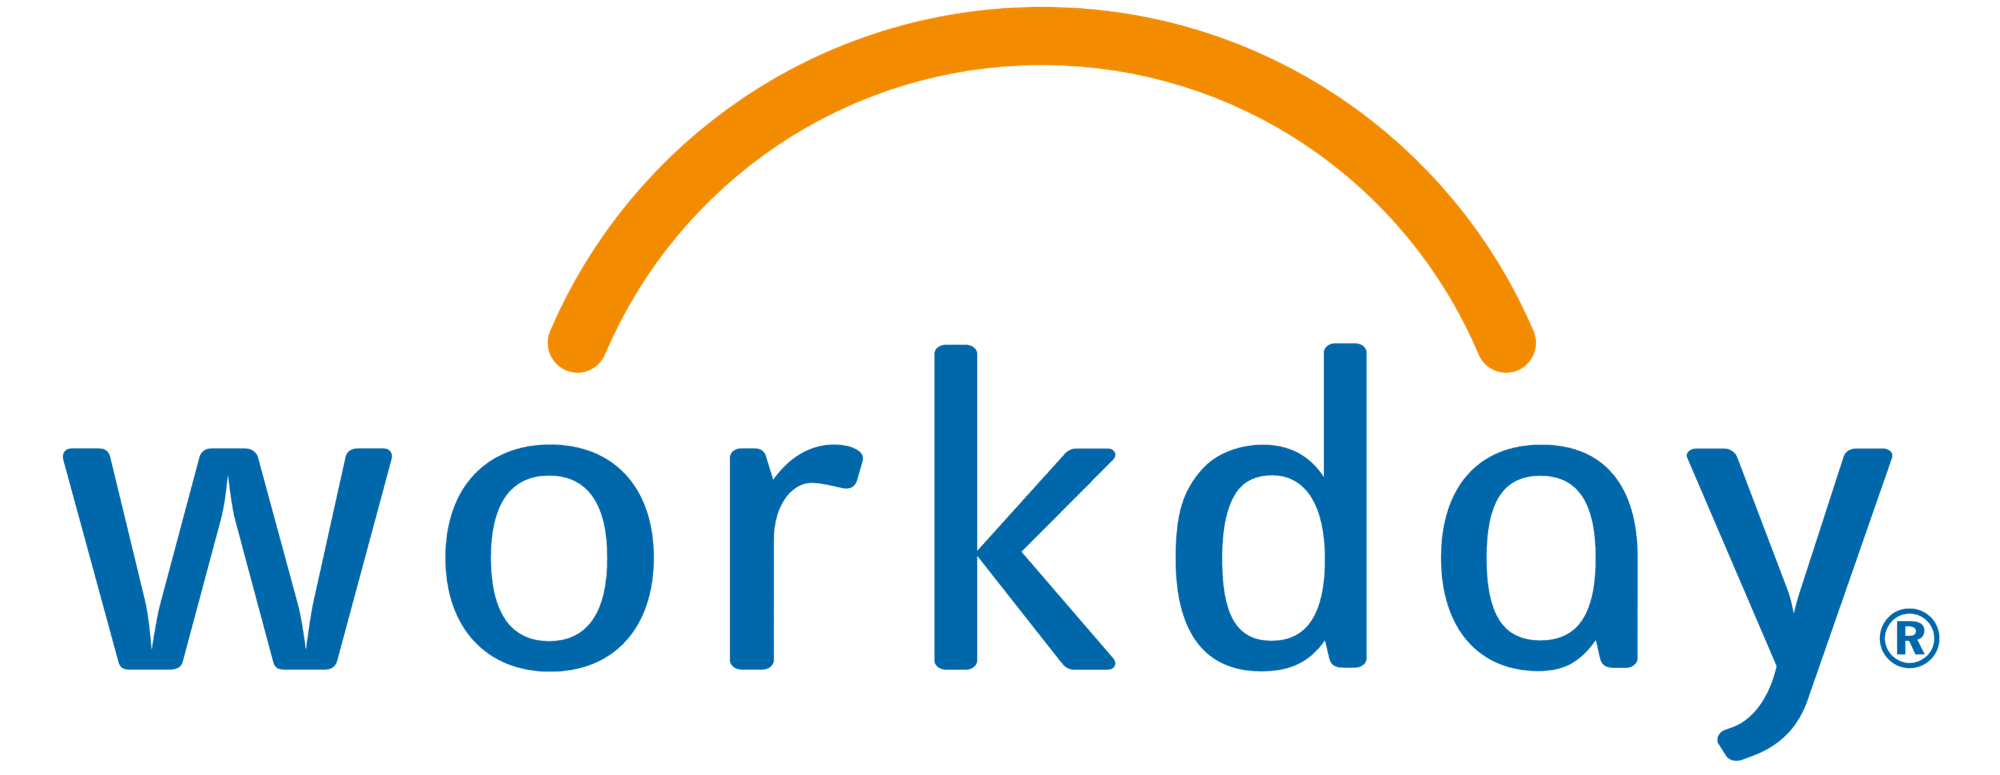 Welcome to Workday Training